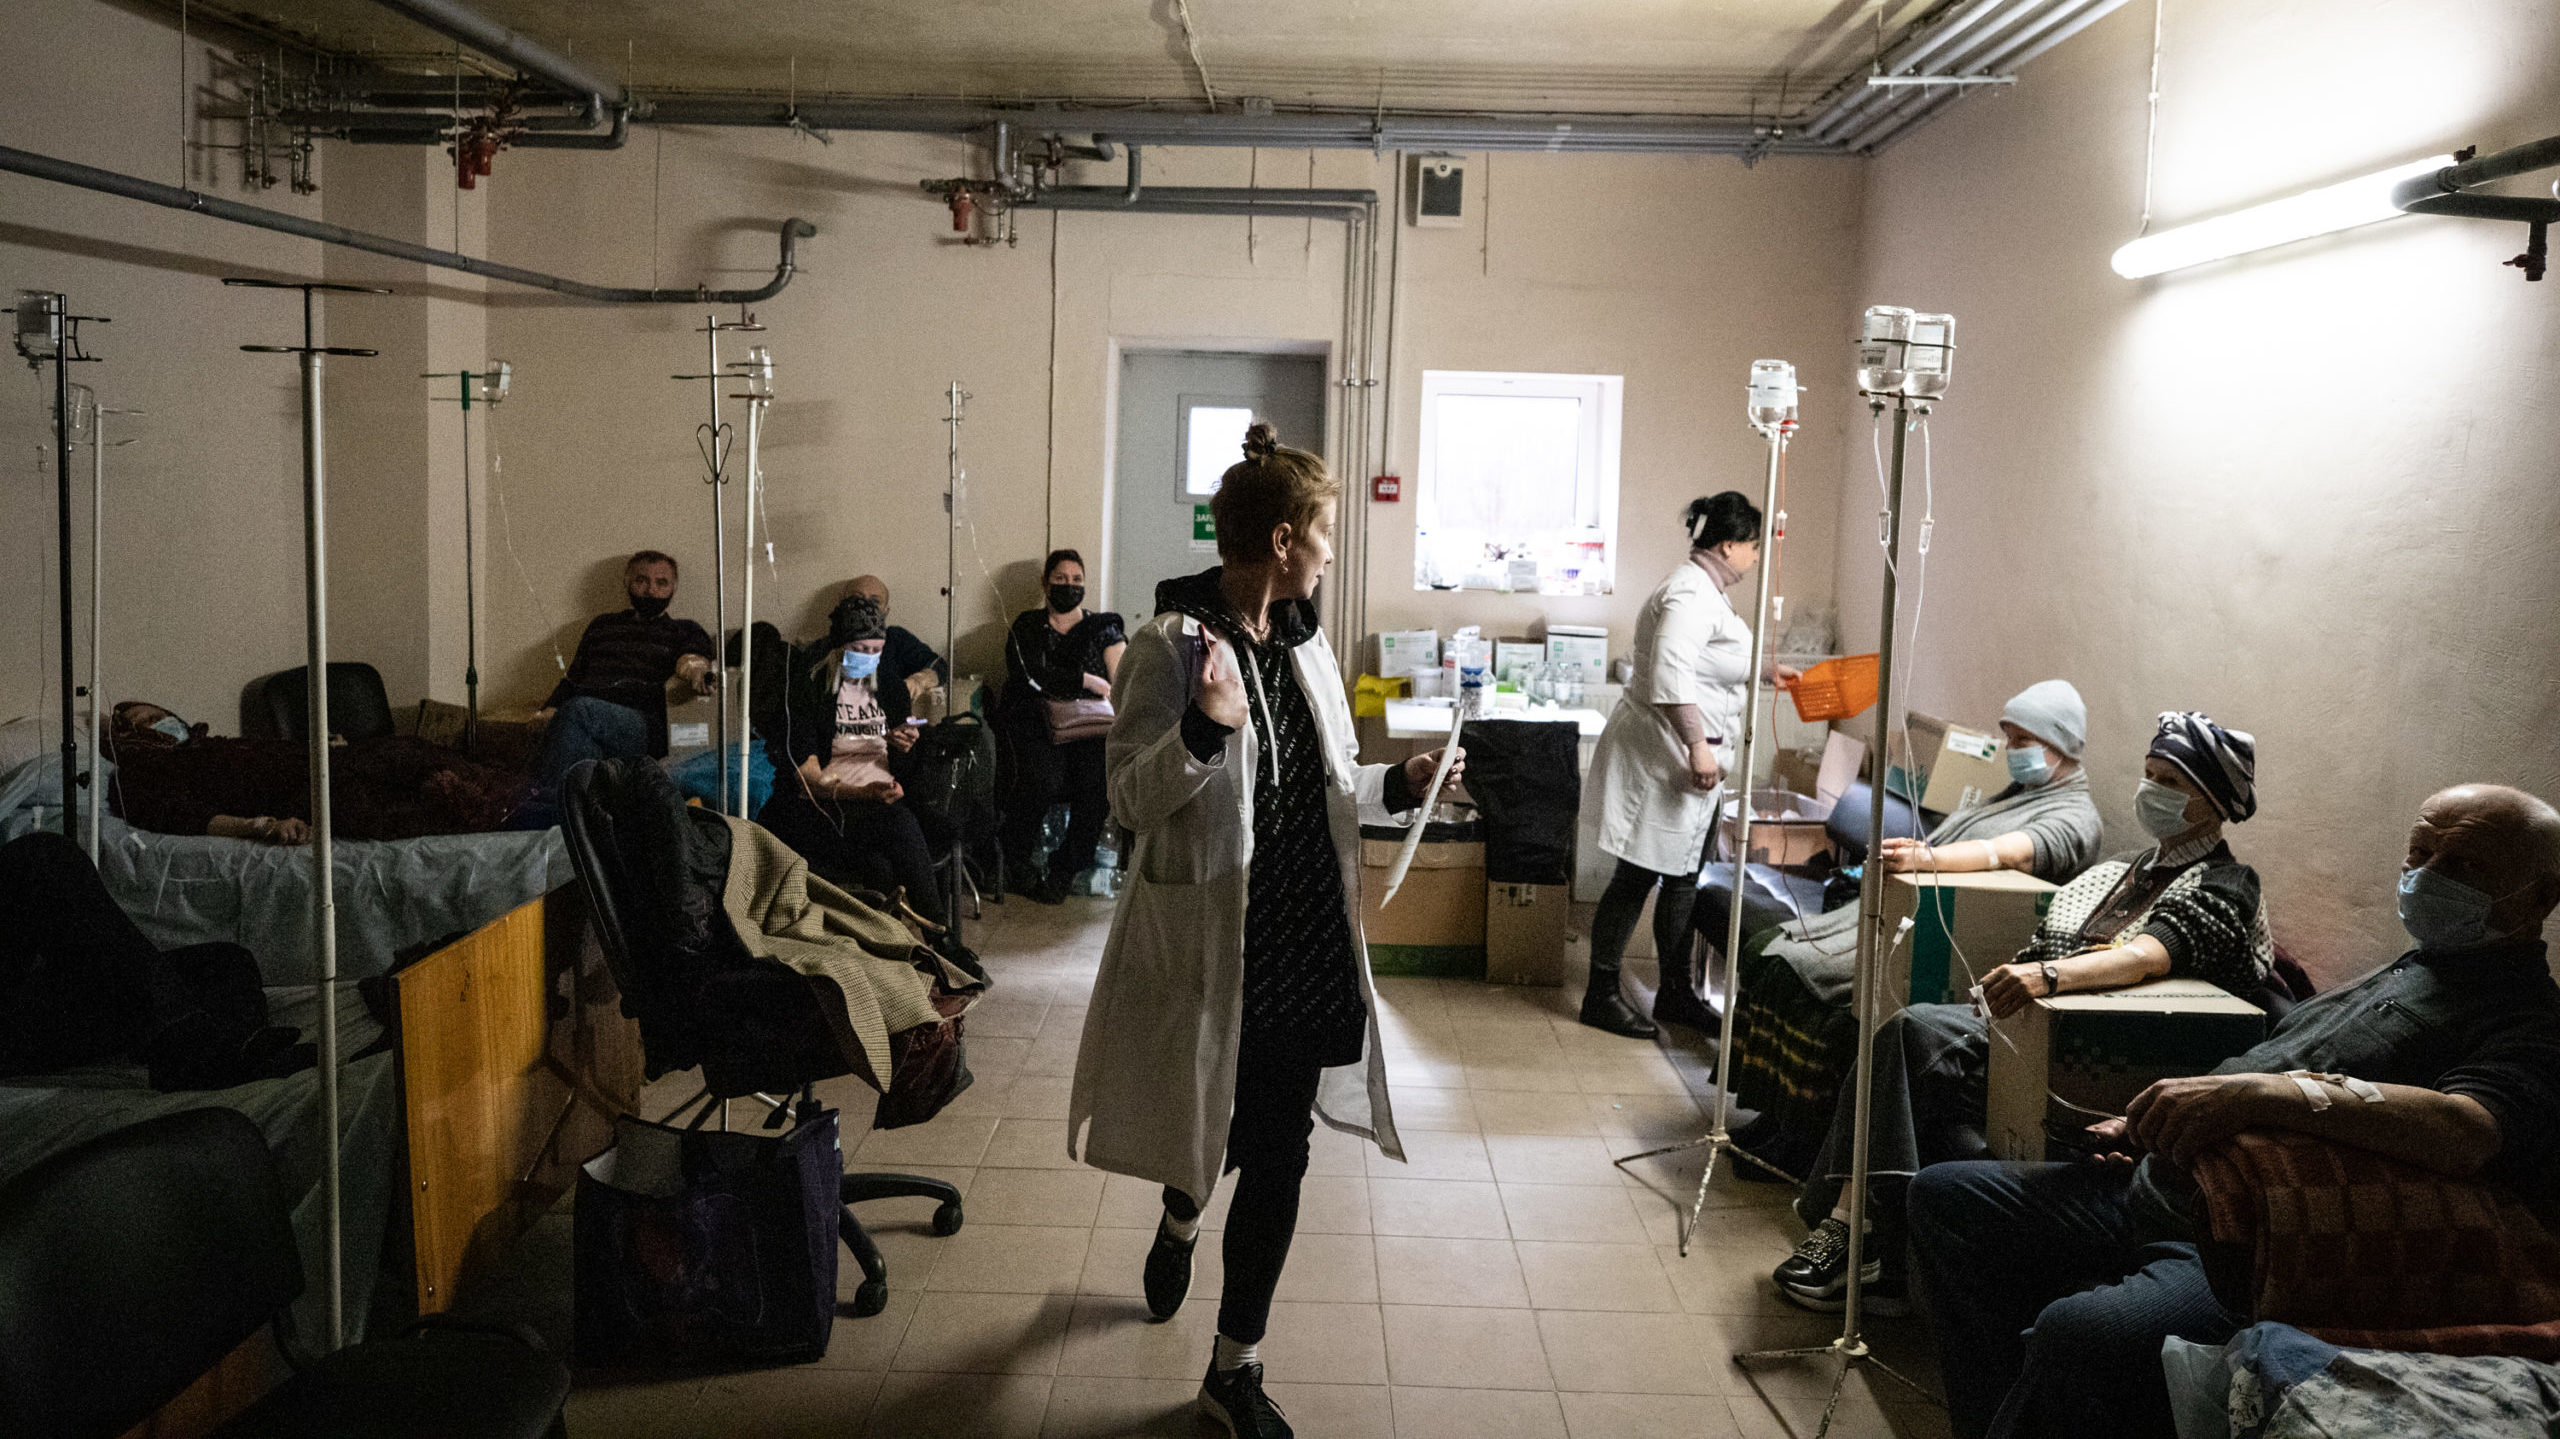 In War-Torn Ukraine, Medical Staff Struggle To Treat Cancer With Help of Israeli Experts